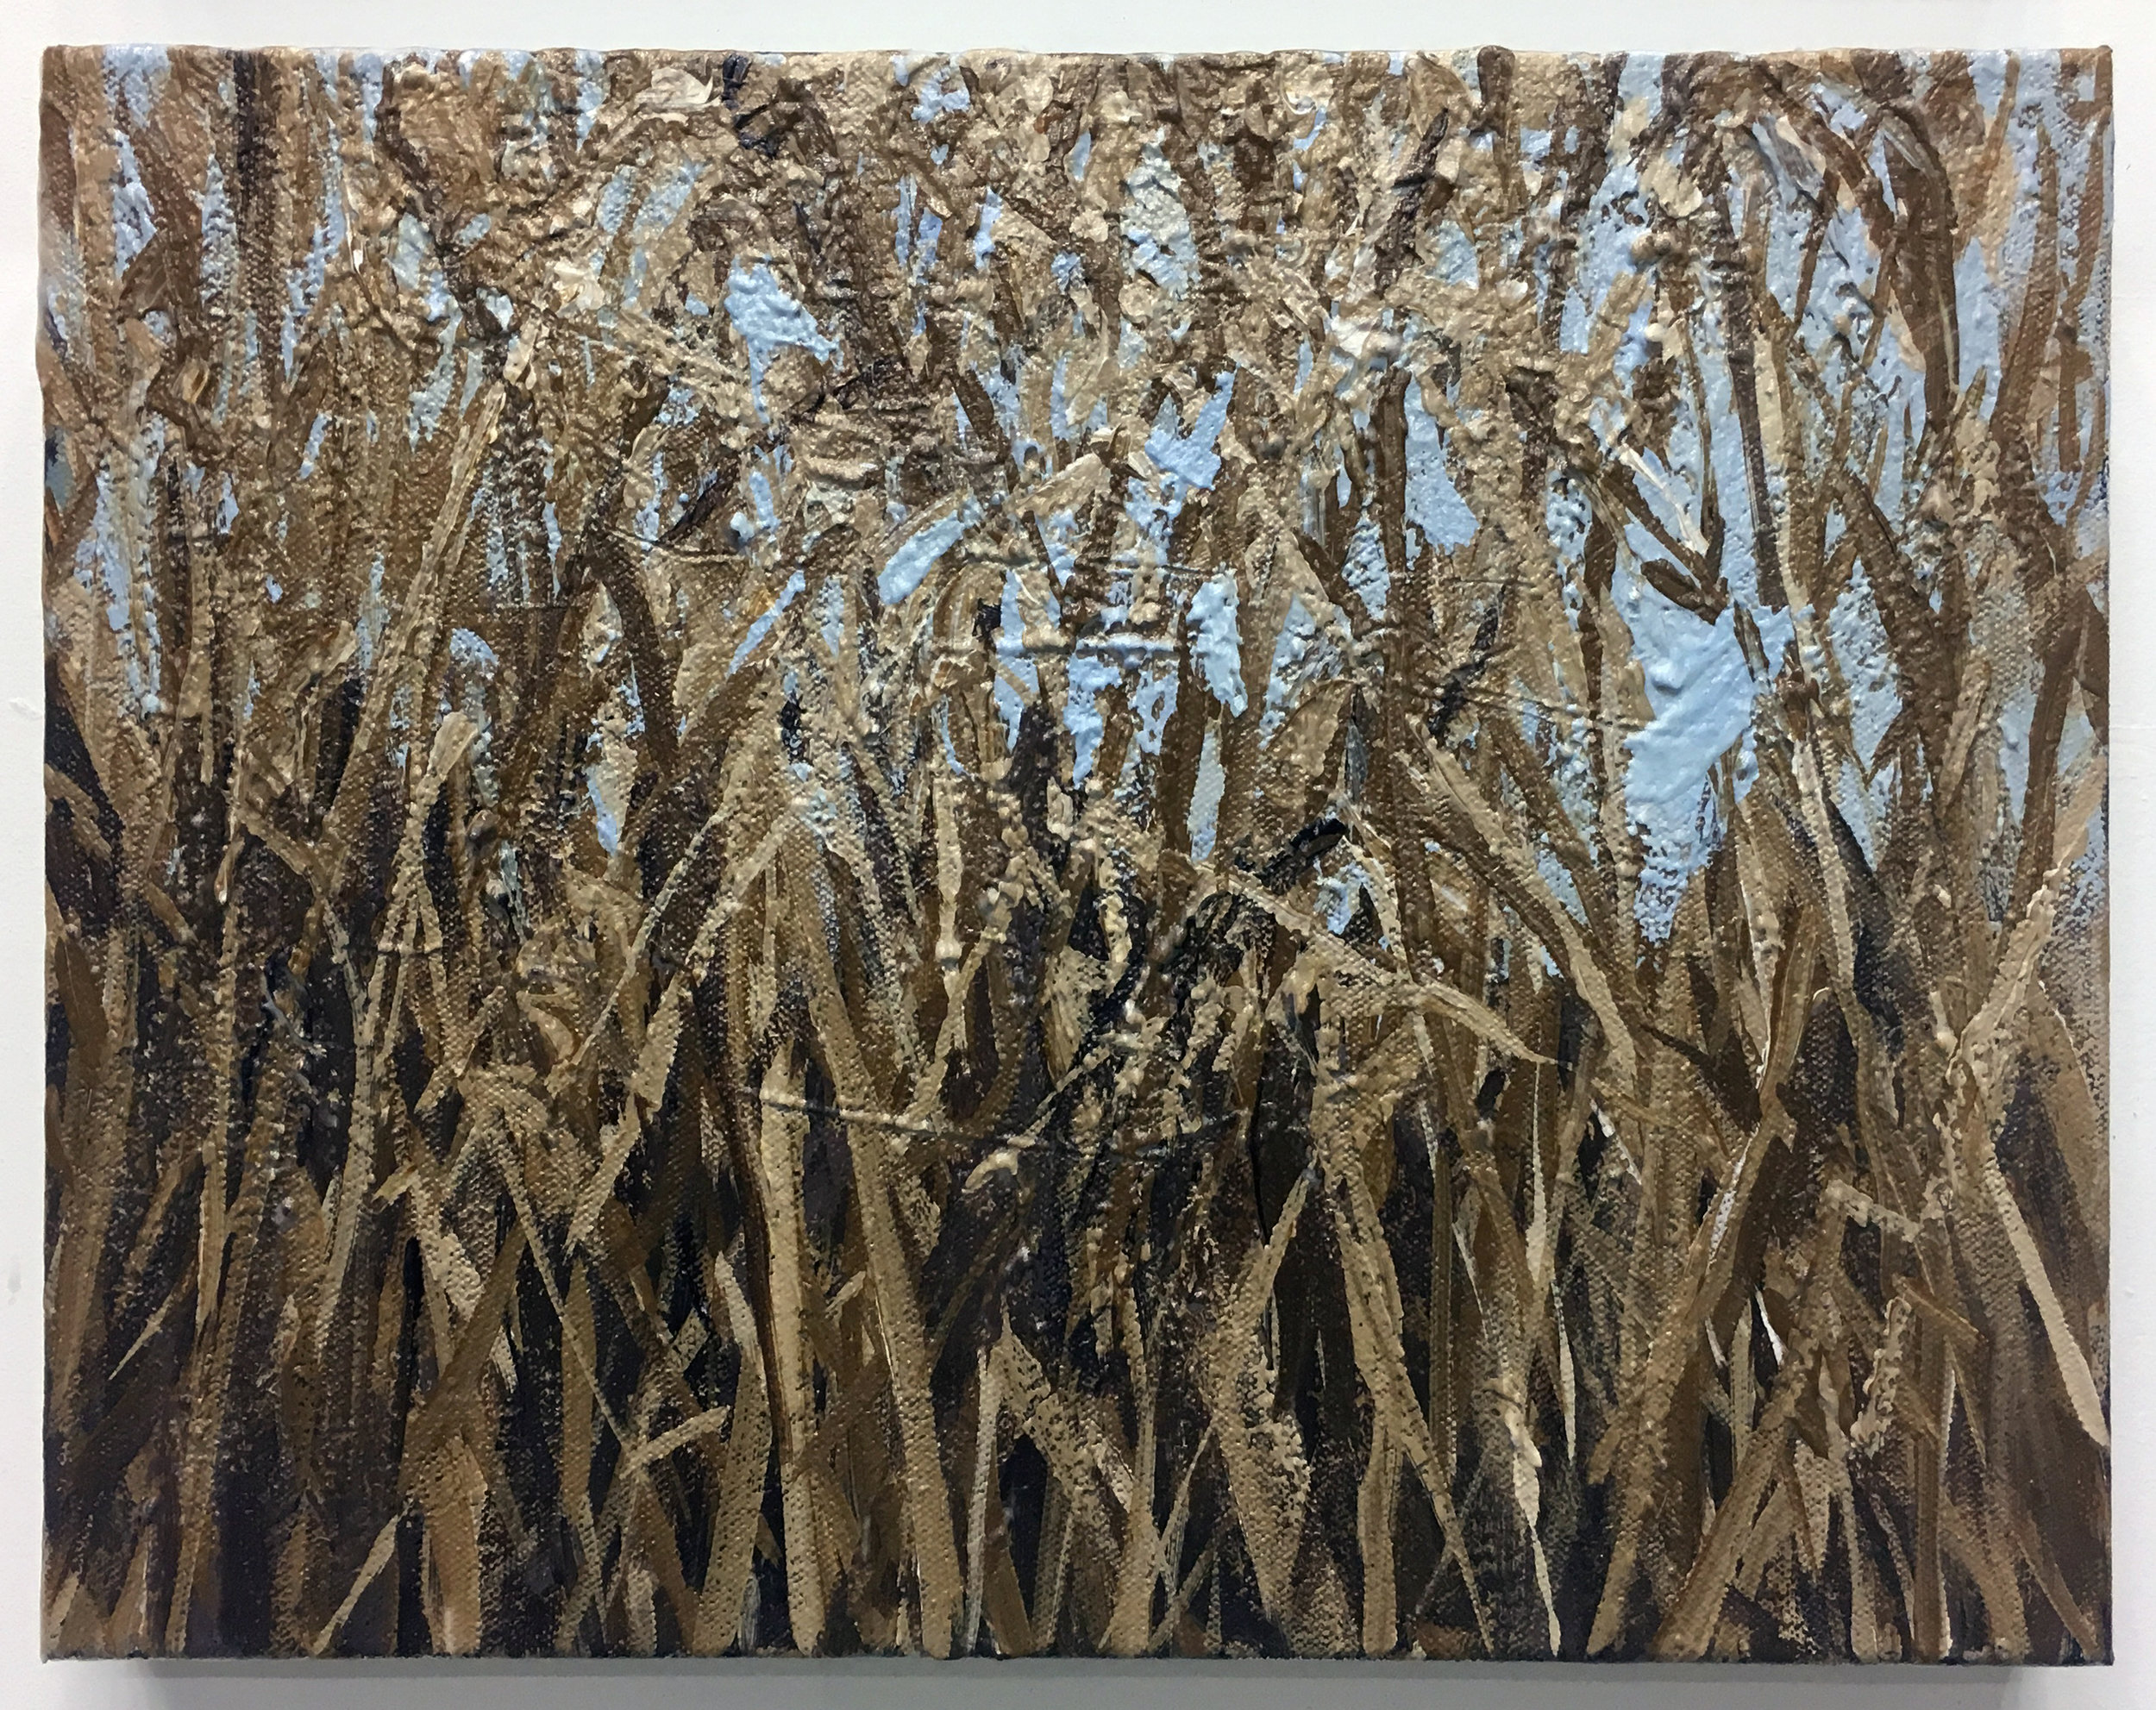  Reeds, acrylic on canvas, 11 x 14 inches, 2016 